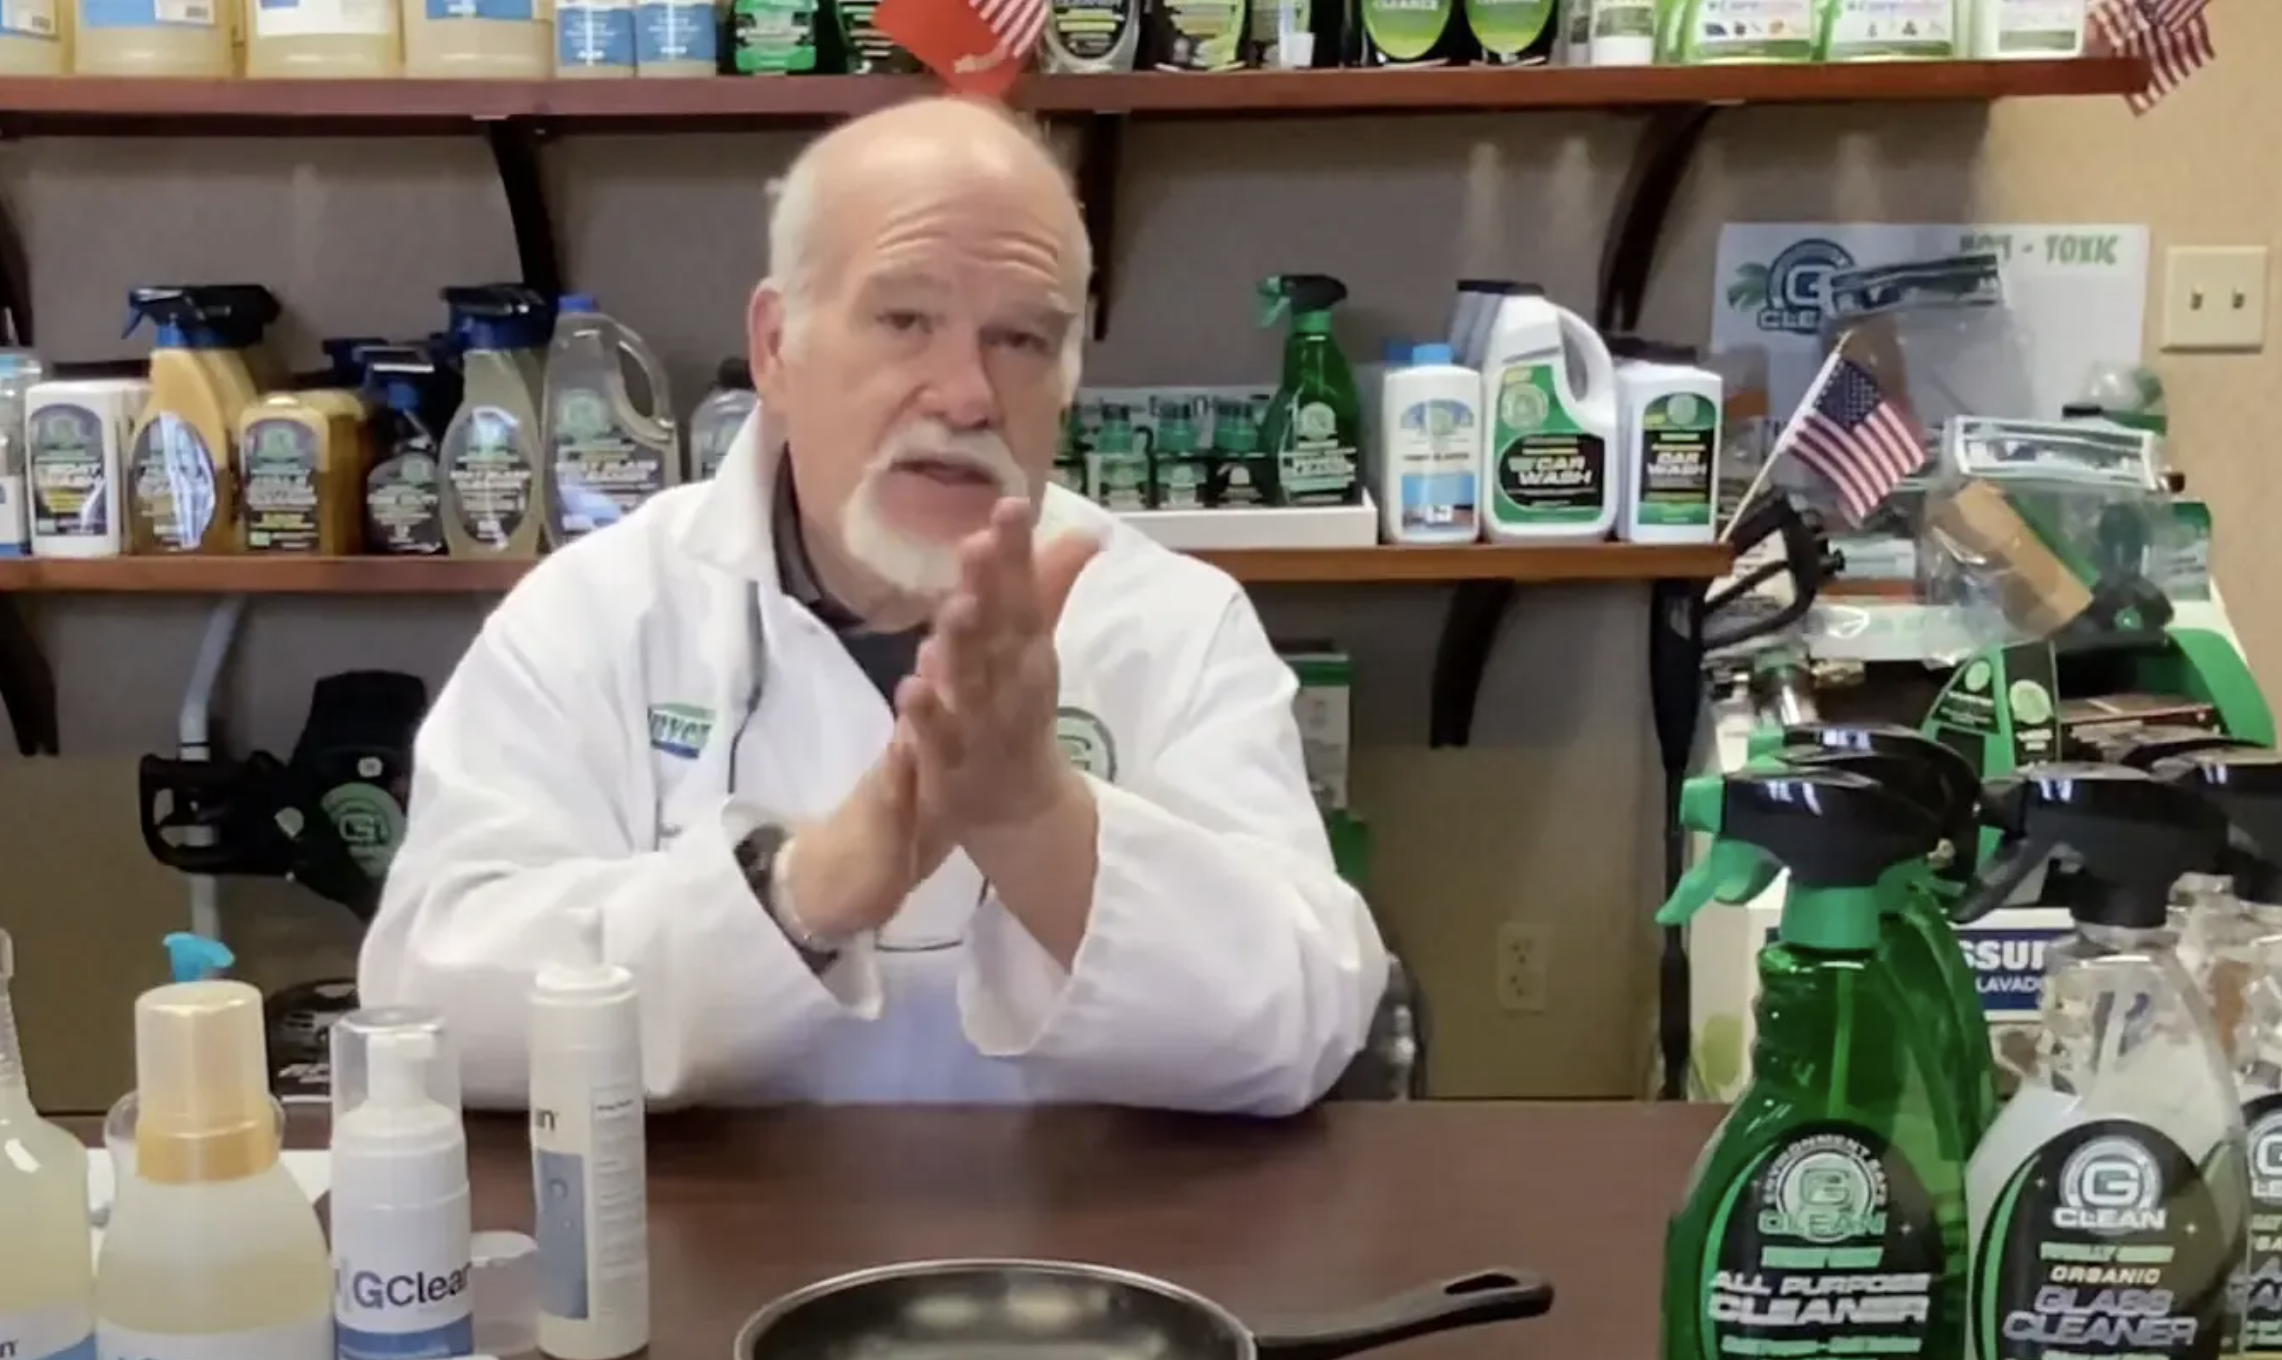 Bearded, white-haired man in labcoat rubbing his hands together in front of many cleaning products.